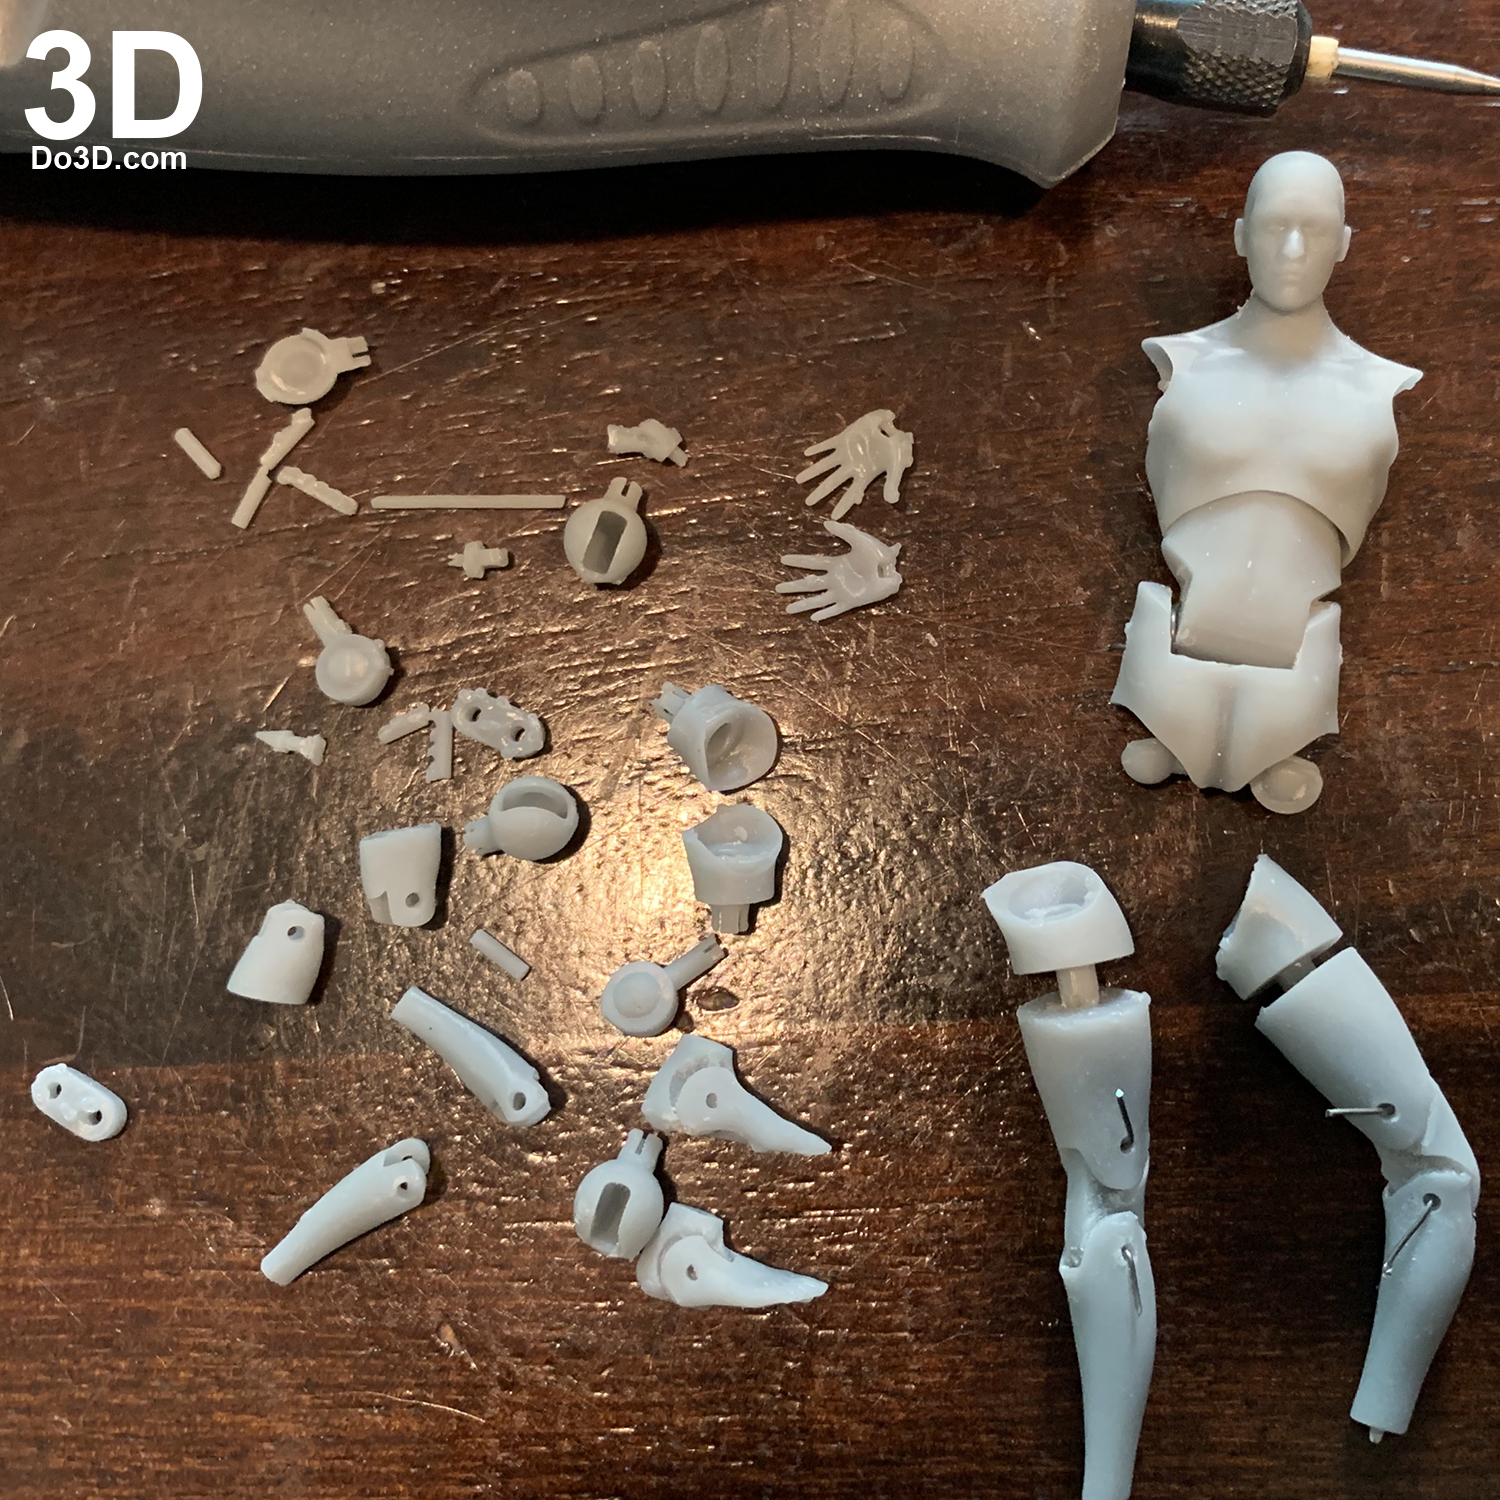 3D Printable Model: Articulated Action Figure Toy With Full Body Joints